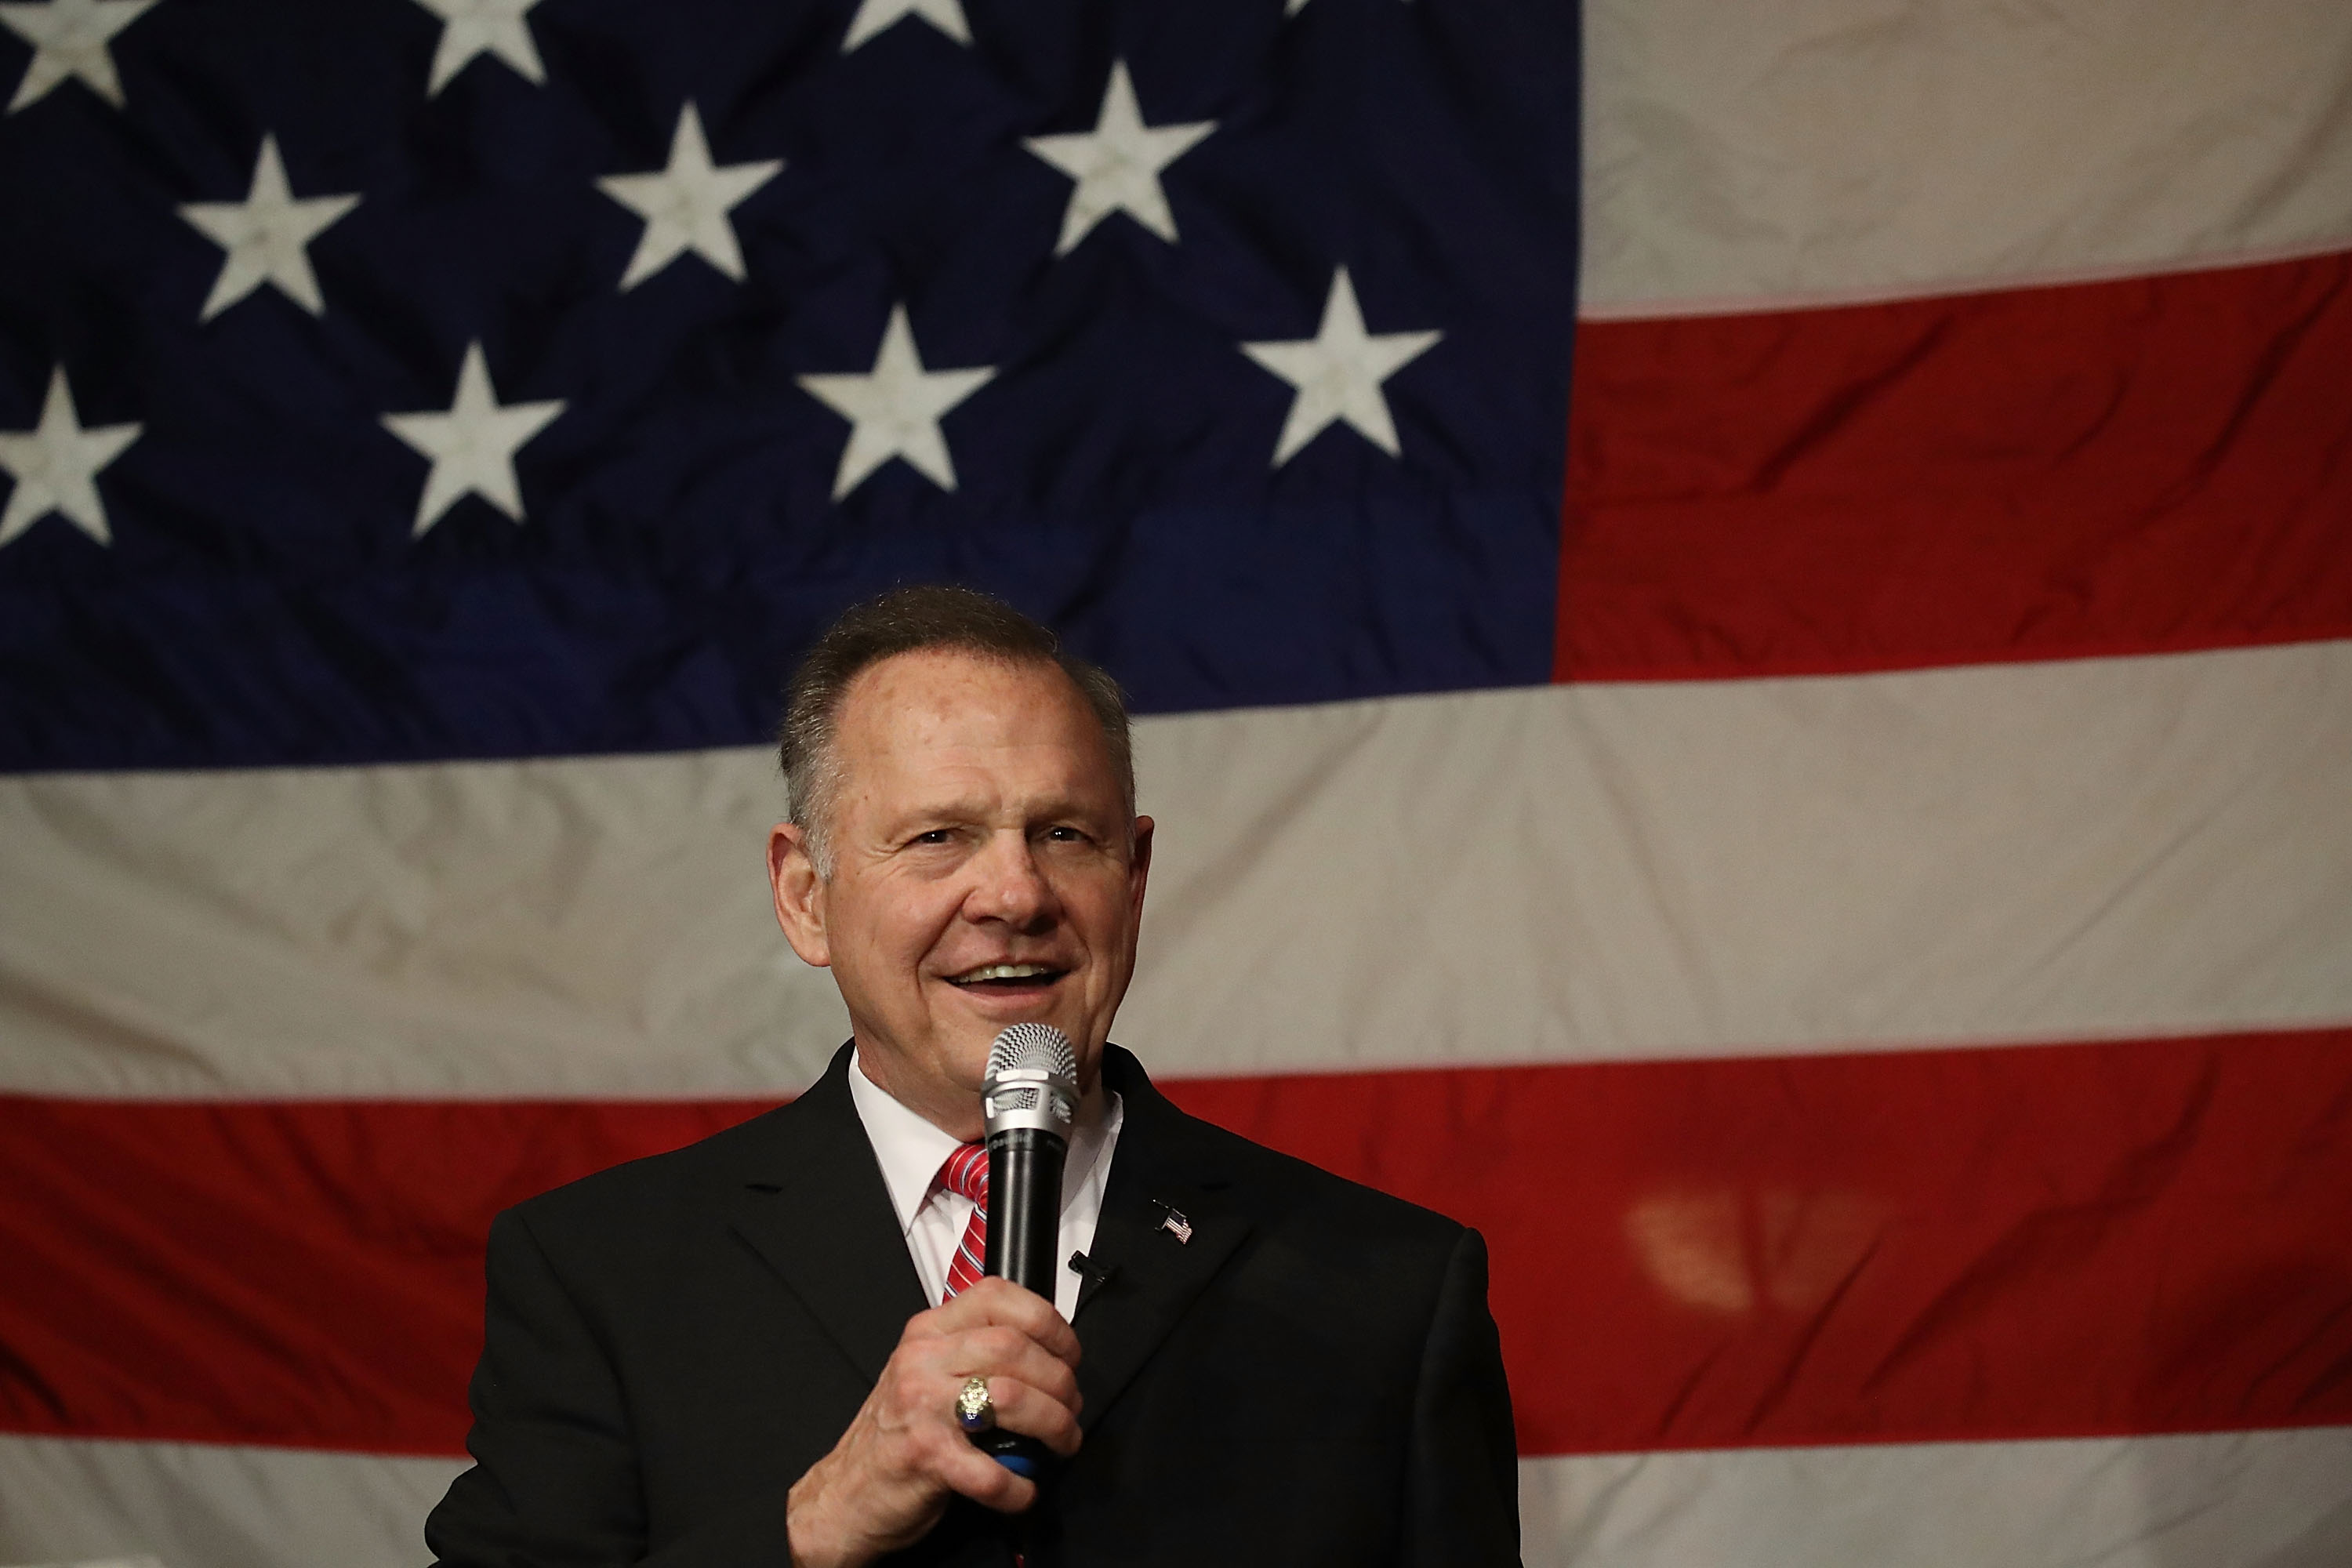 Republican Senatorial candidate Roy Moore speaks during a campaign event on Dec. 5, 2017 in Fairhope, Alabama. (Joe Raedle&mdash;Getty Images)